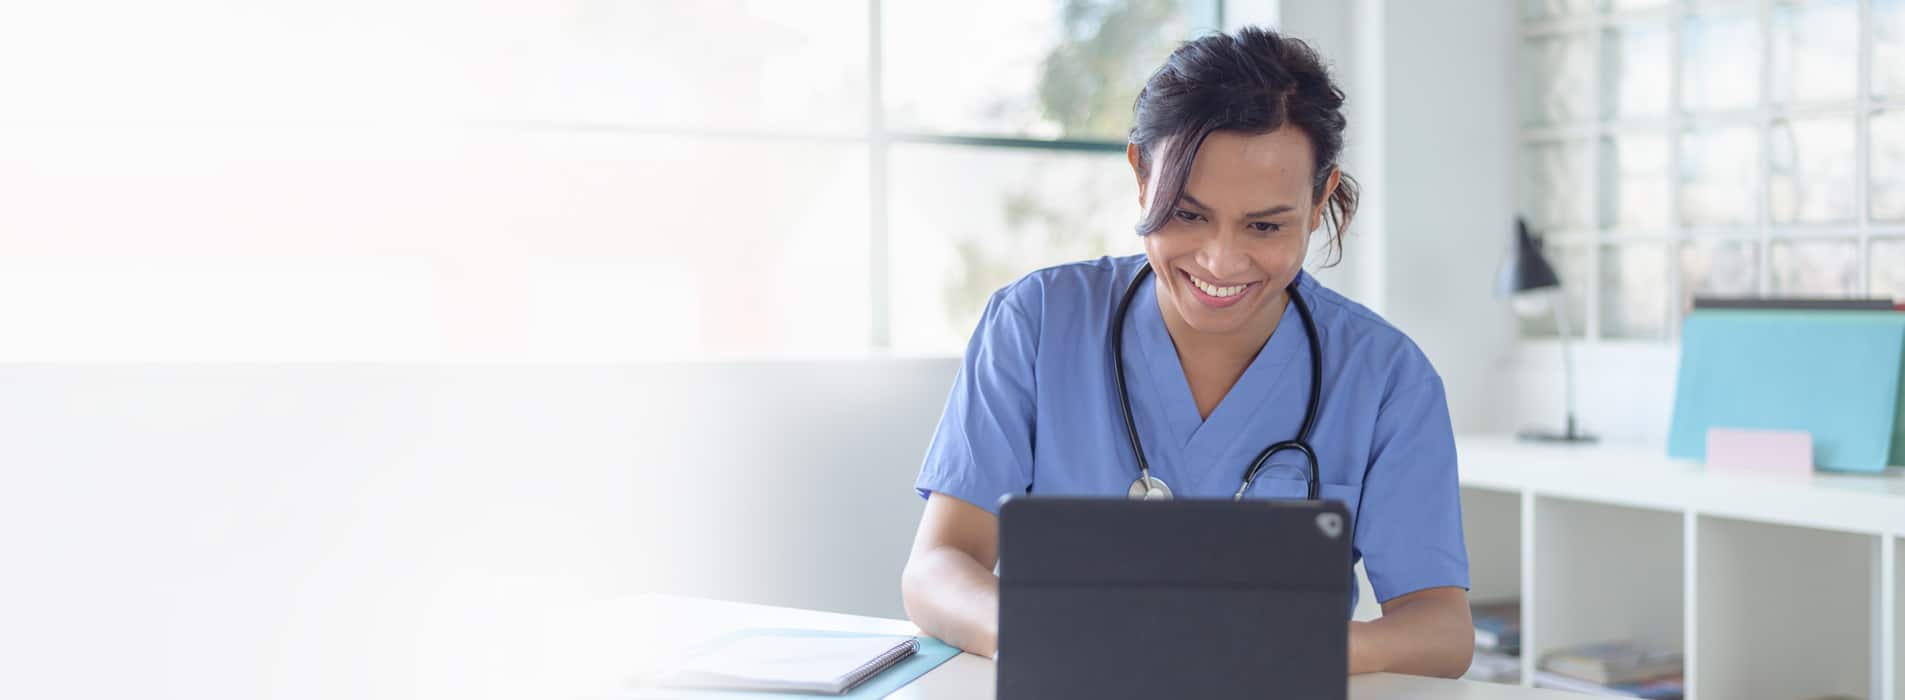 Female physician with scrubs on and a stethoscope around her neck provides virtual health services to a patient using a tablet device